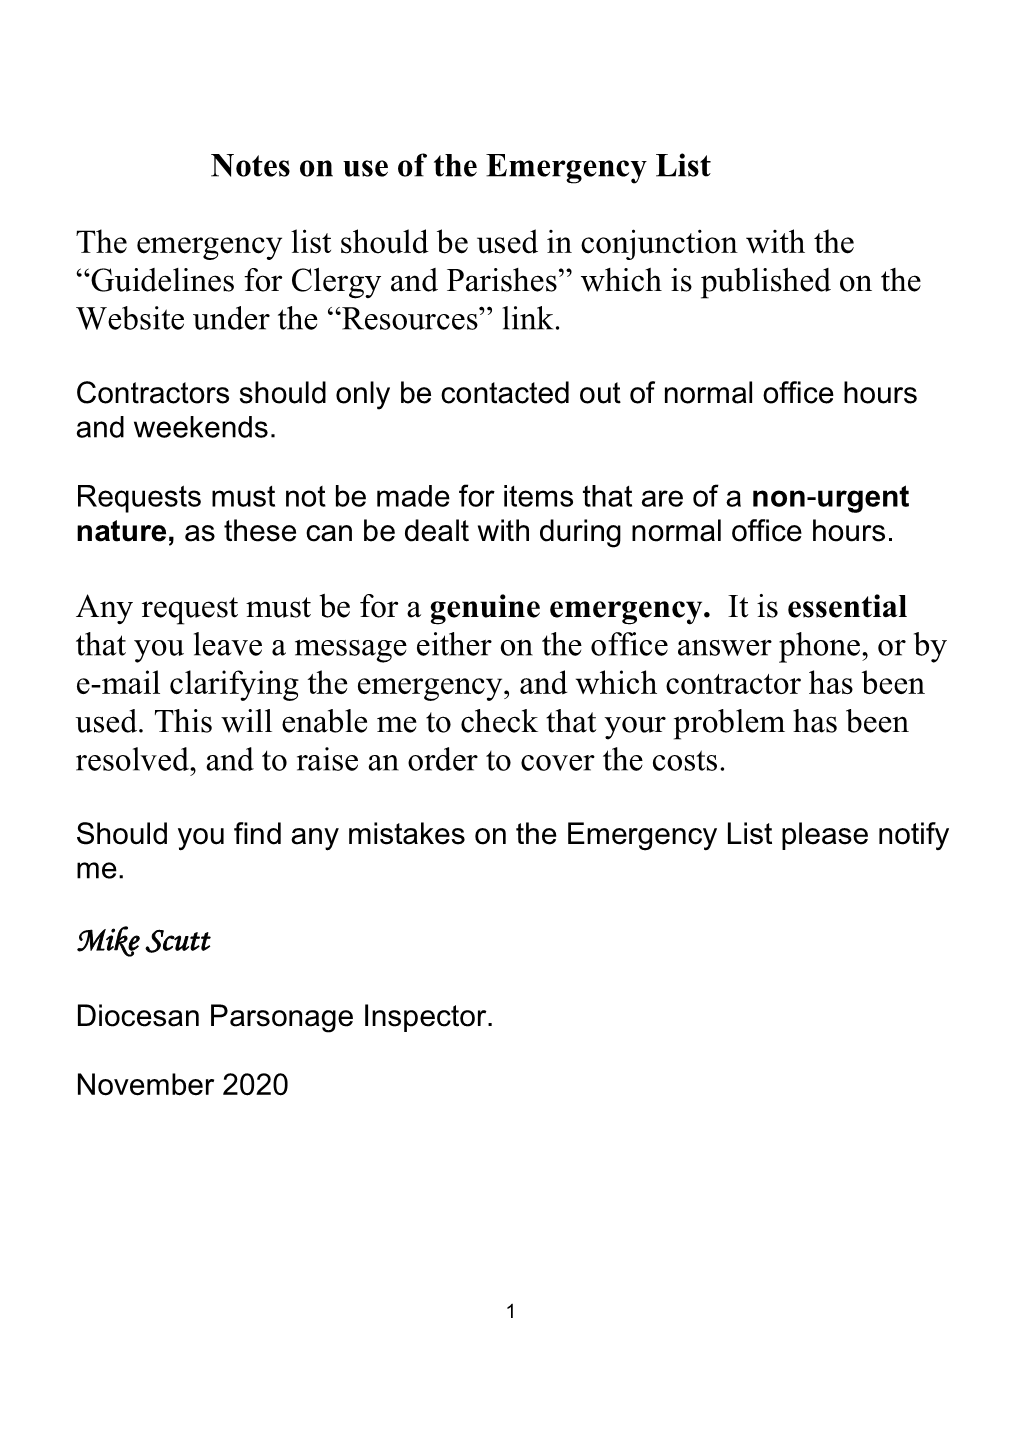 Notes on Use of the Emergency List